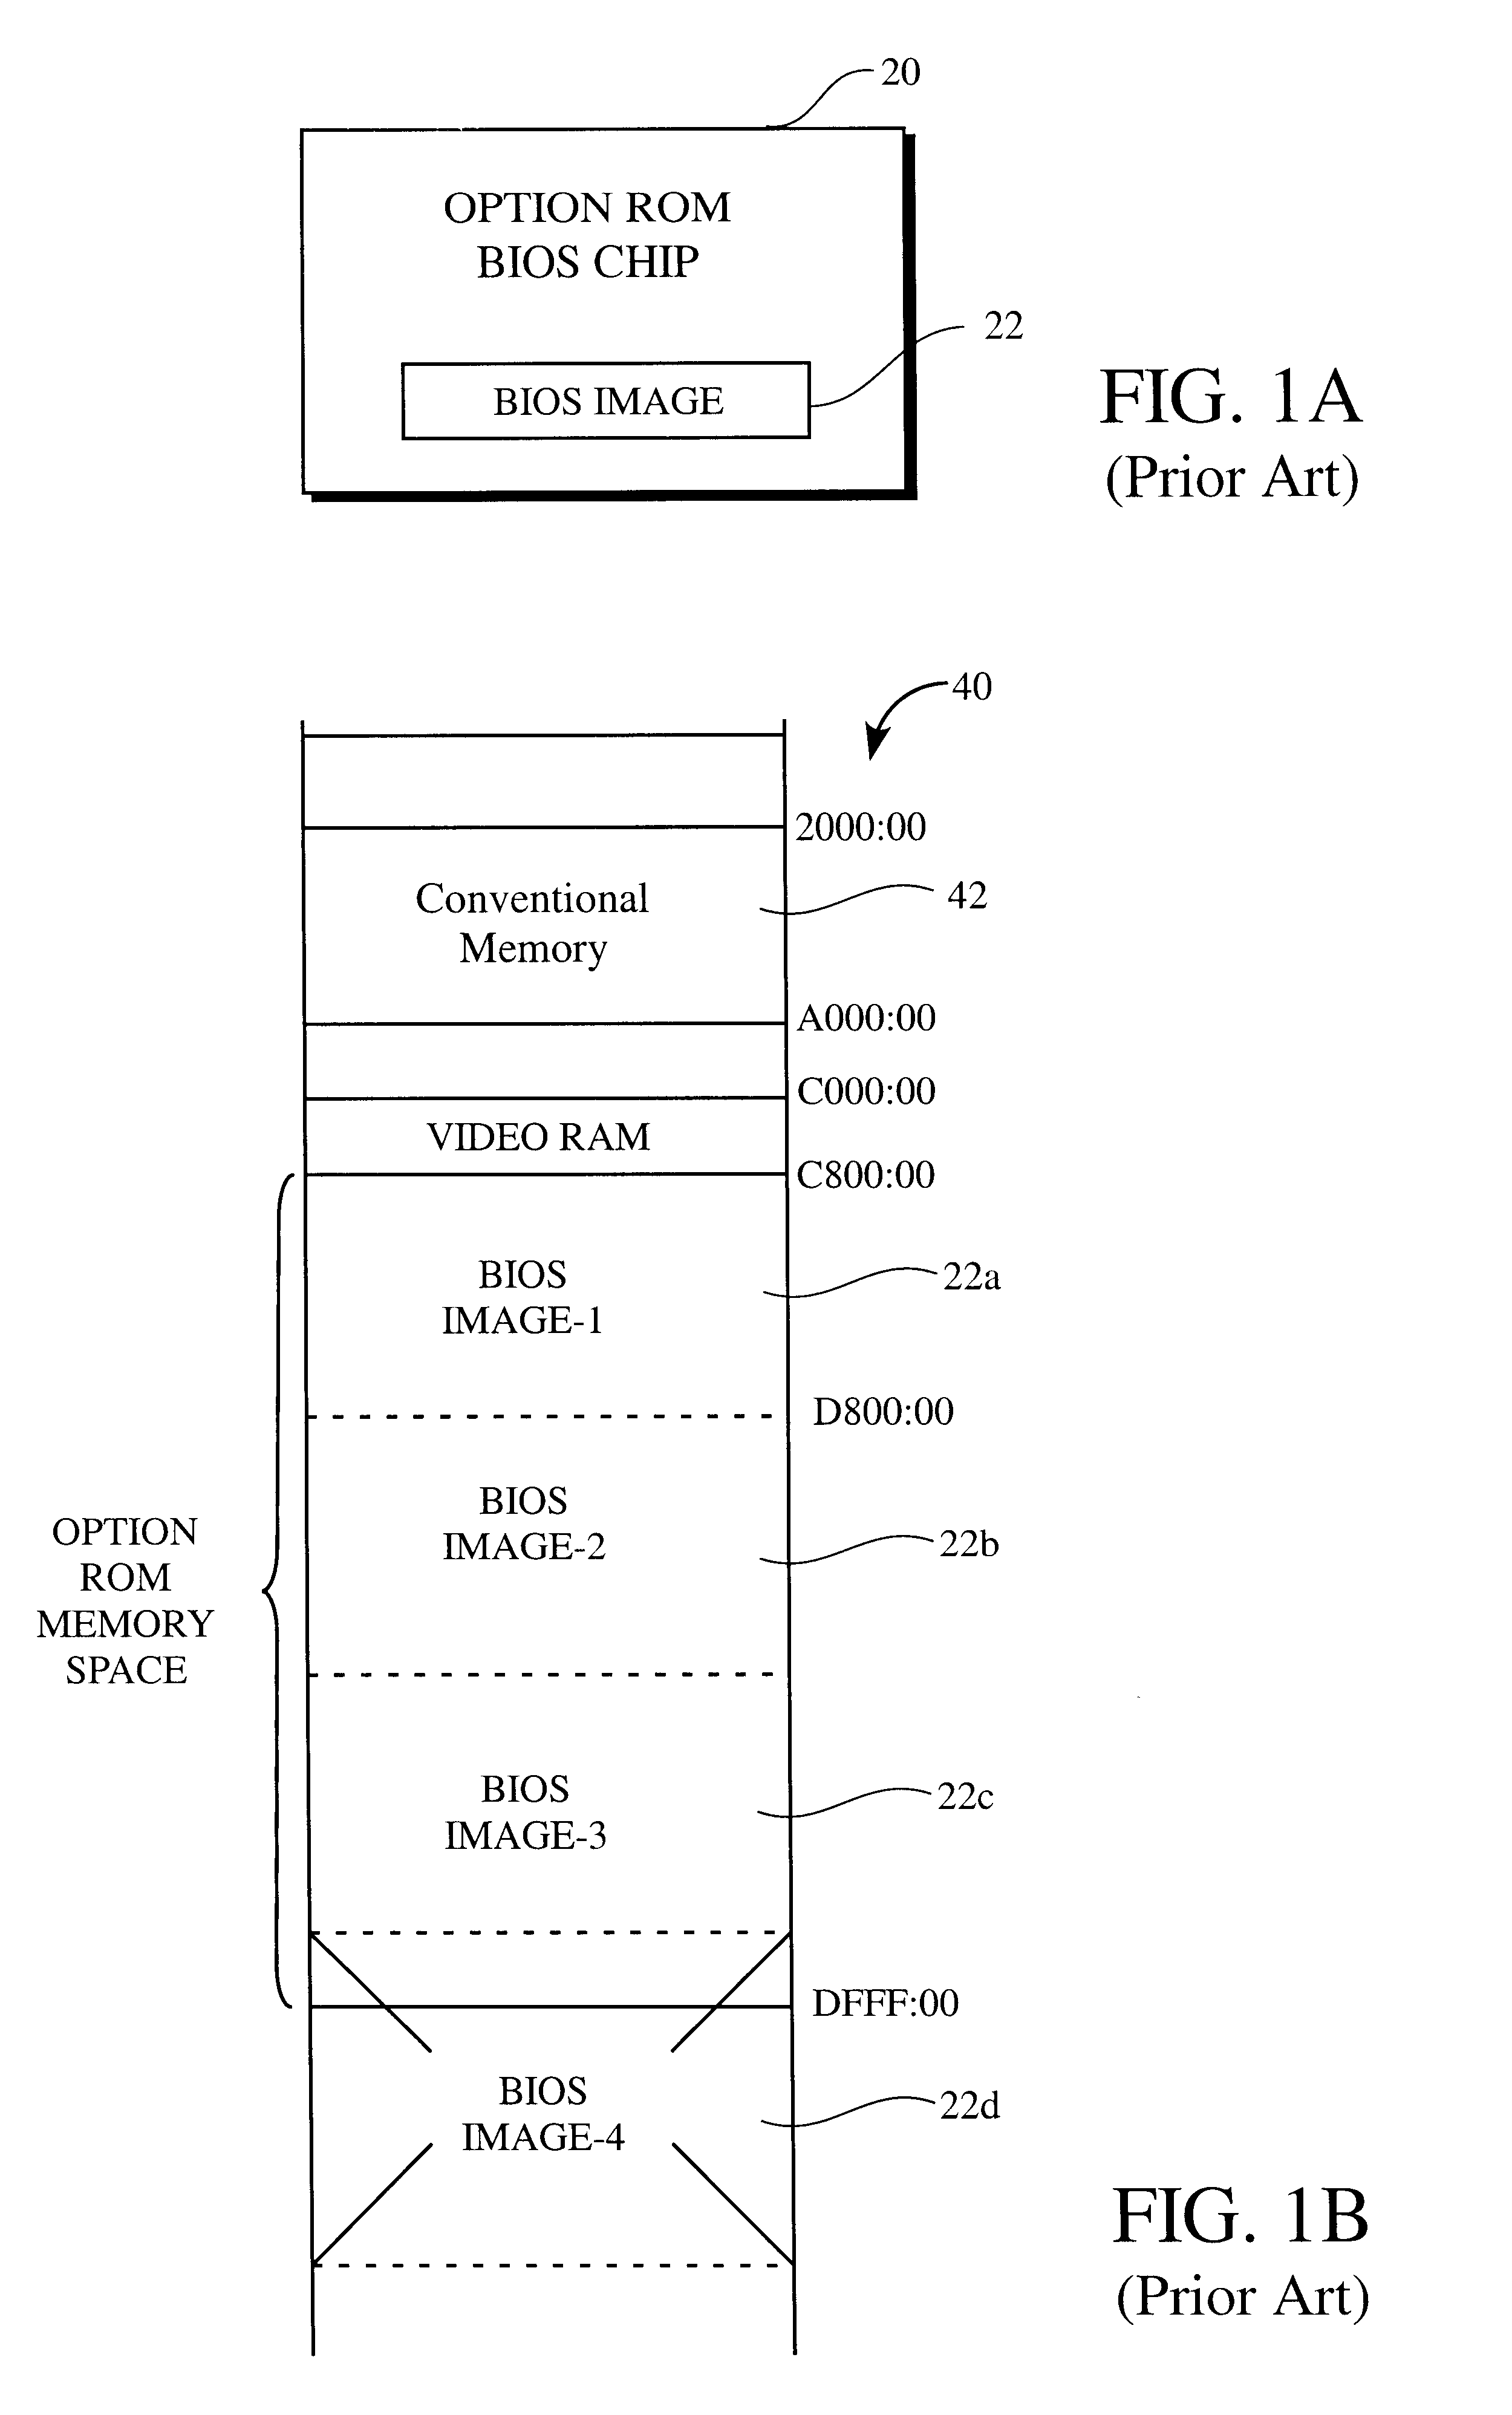 Method of conserving memory resources during execution of system BIOS